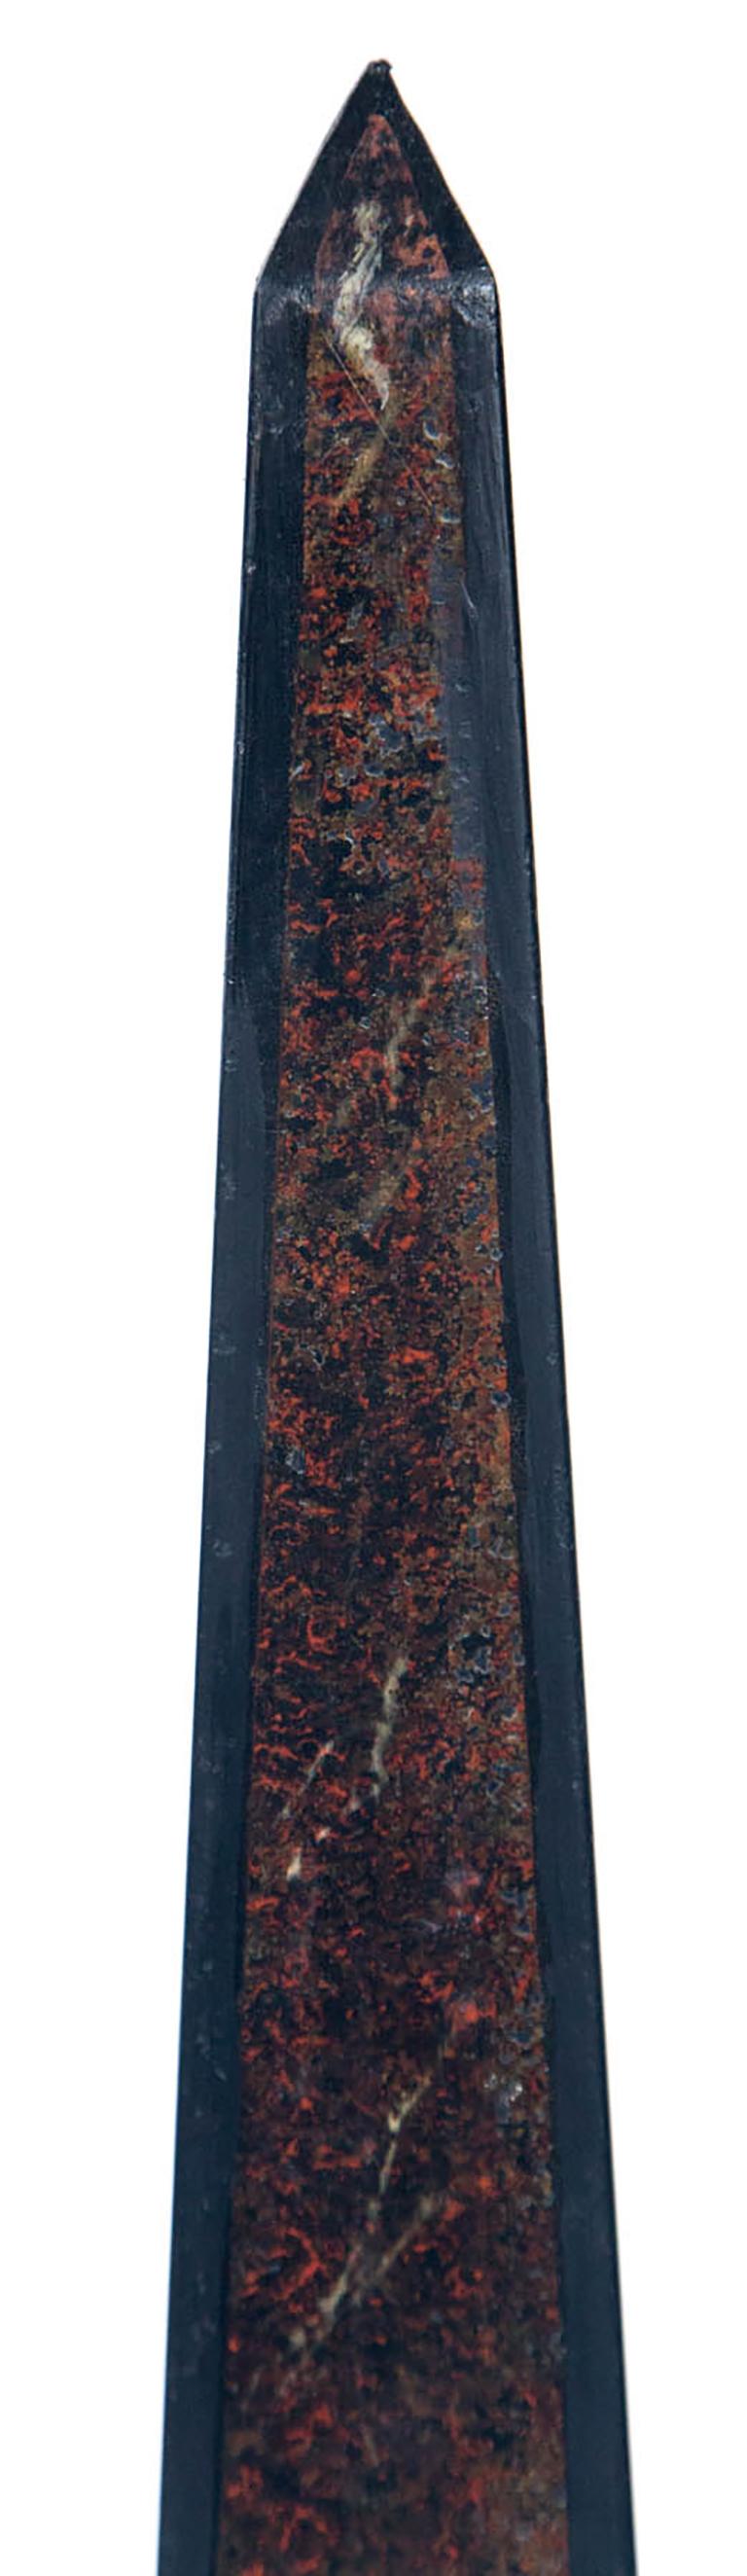 Hand-Crafted Pair of Antique Multicolored Marble, Slate and Faux Marble Obelisks For Sale